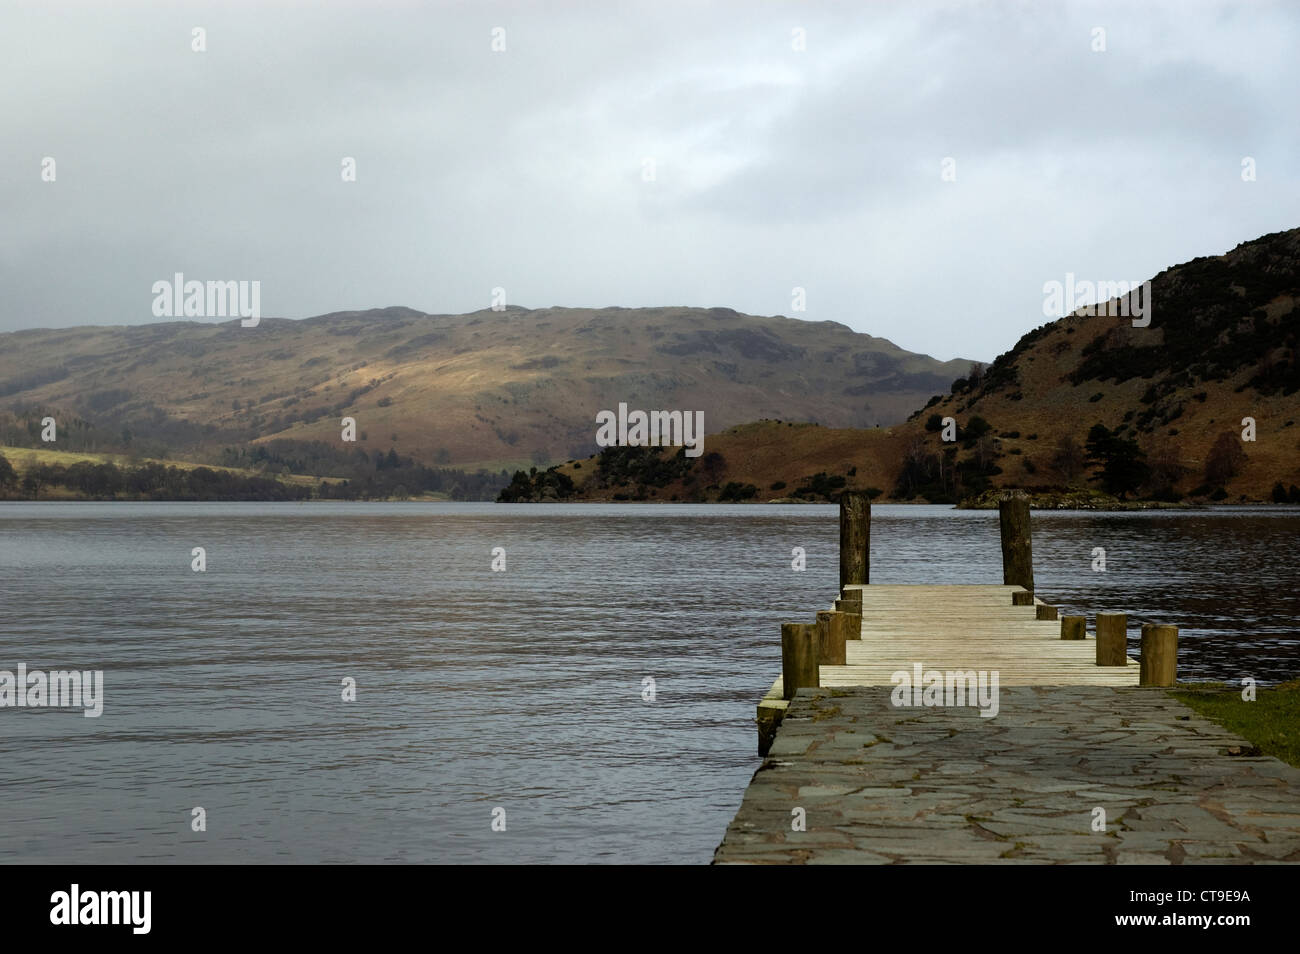 View of the Ullswater lake from the garden pier of the Inn On The Lake hotel. Feb 2012 Stock Photo